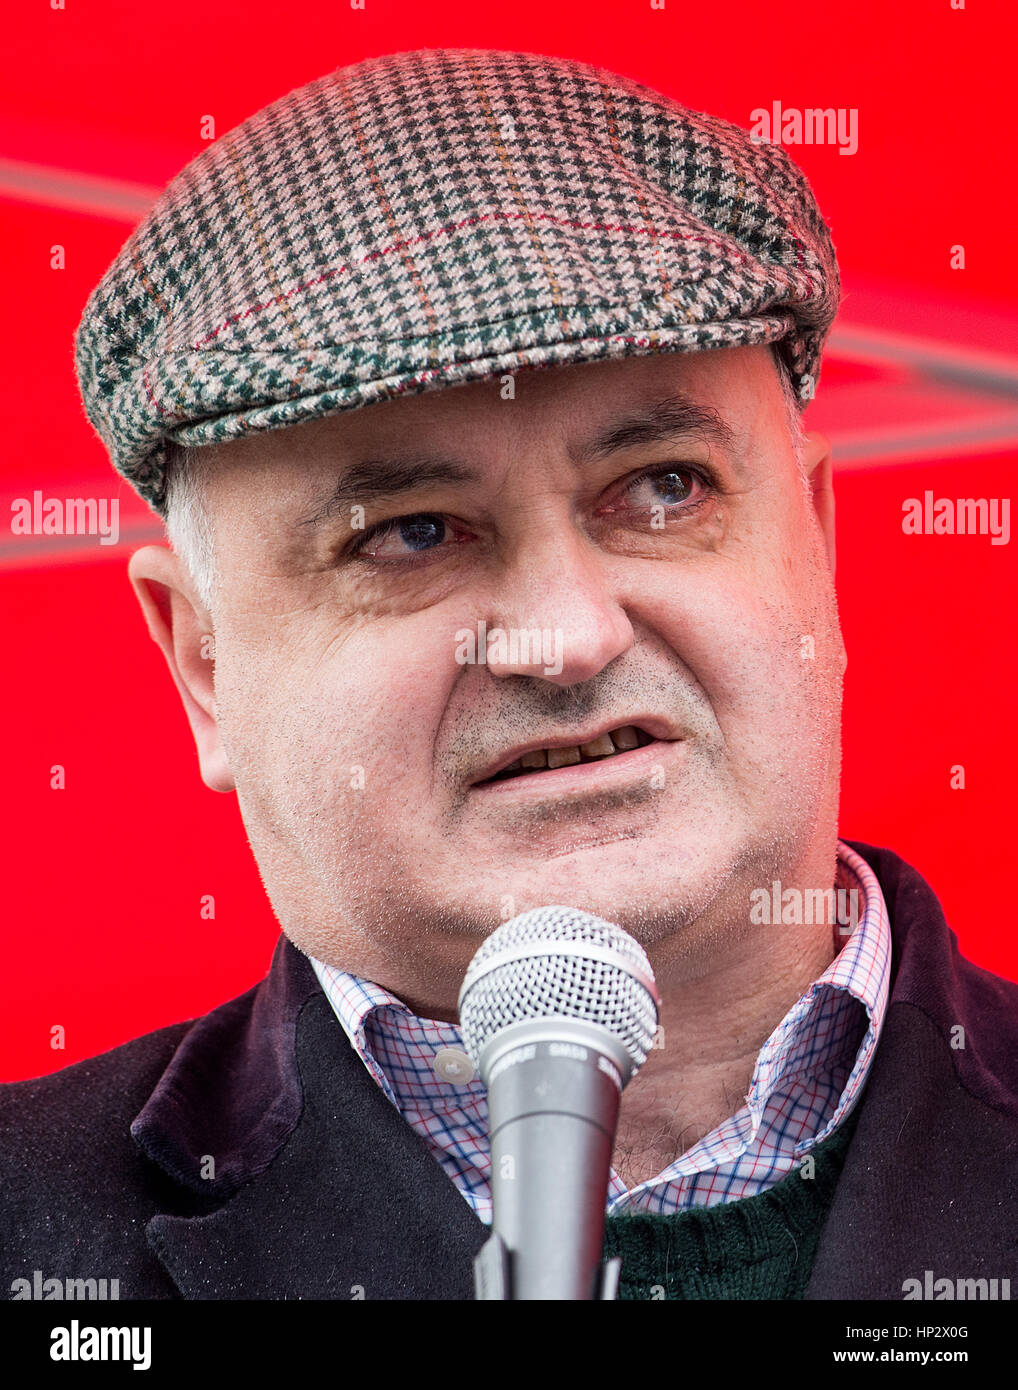 Andrew Murray from UNITE Union, gives a speech at the Stop Trump's Muslim Ban protest march, outside the US embassy in Grosvenor Square, London, UK. Stock Photo